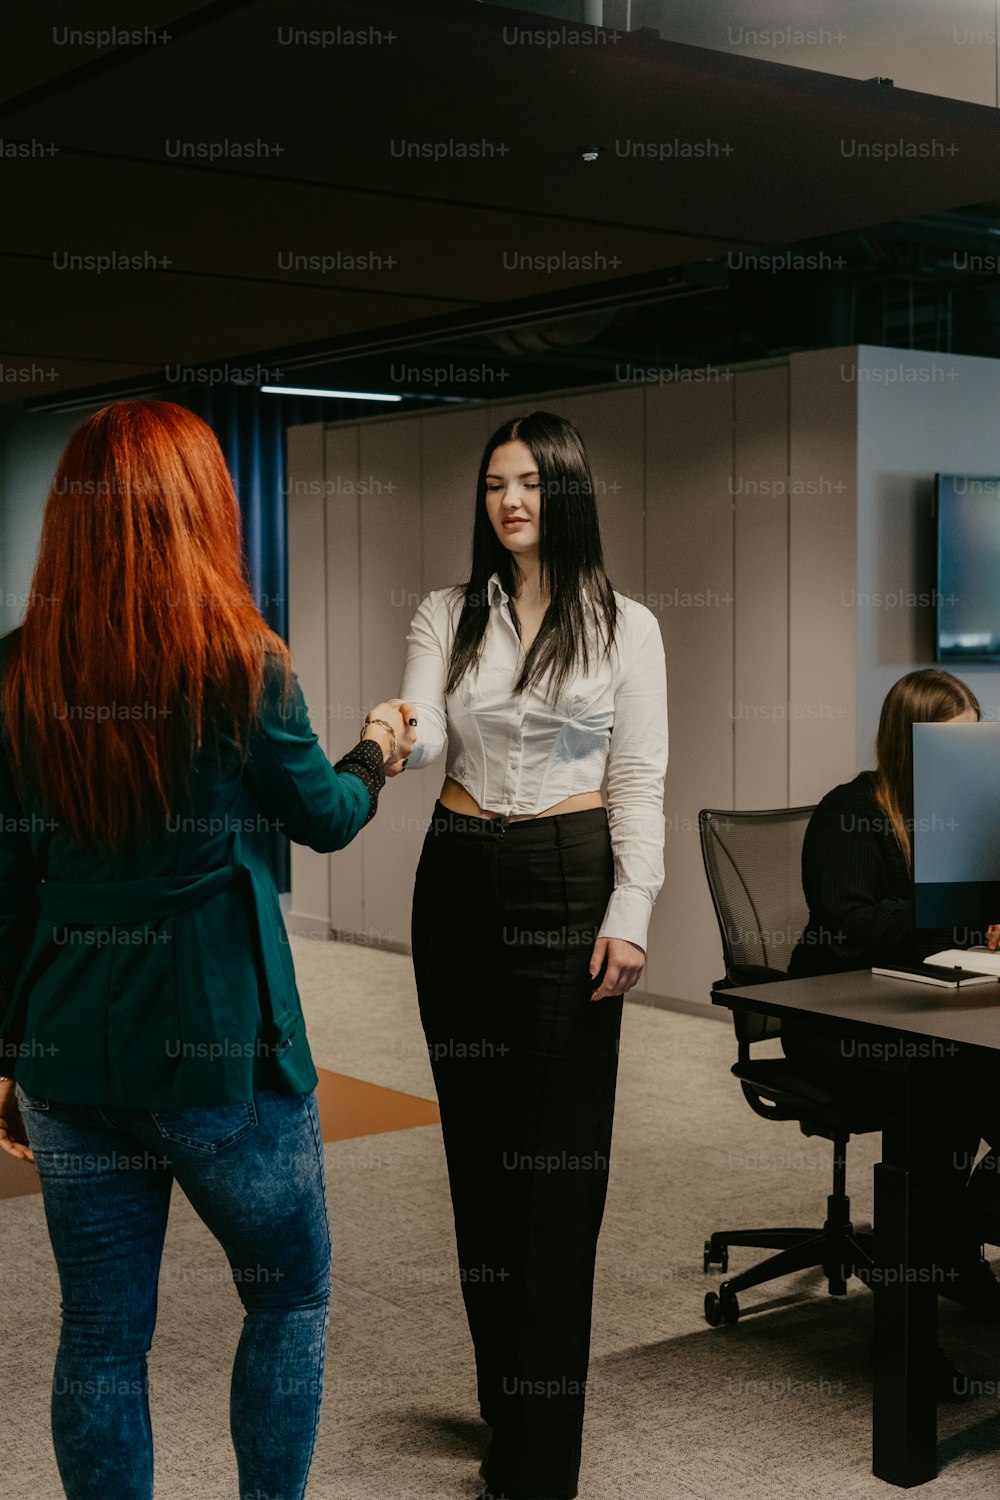 two women shaking hands in an office setting